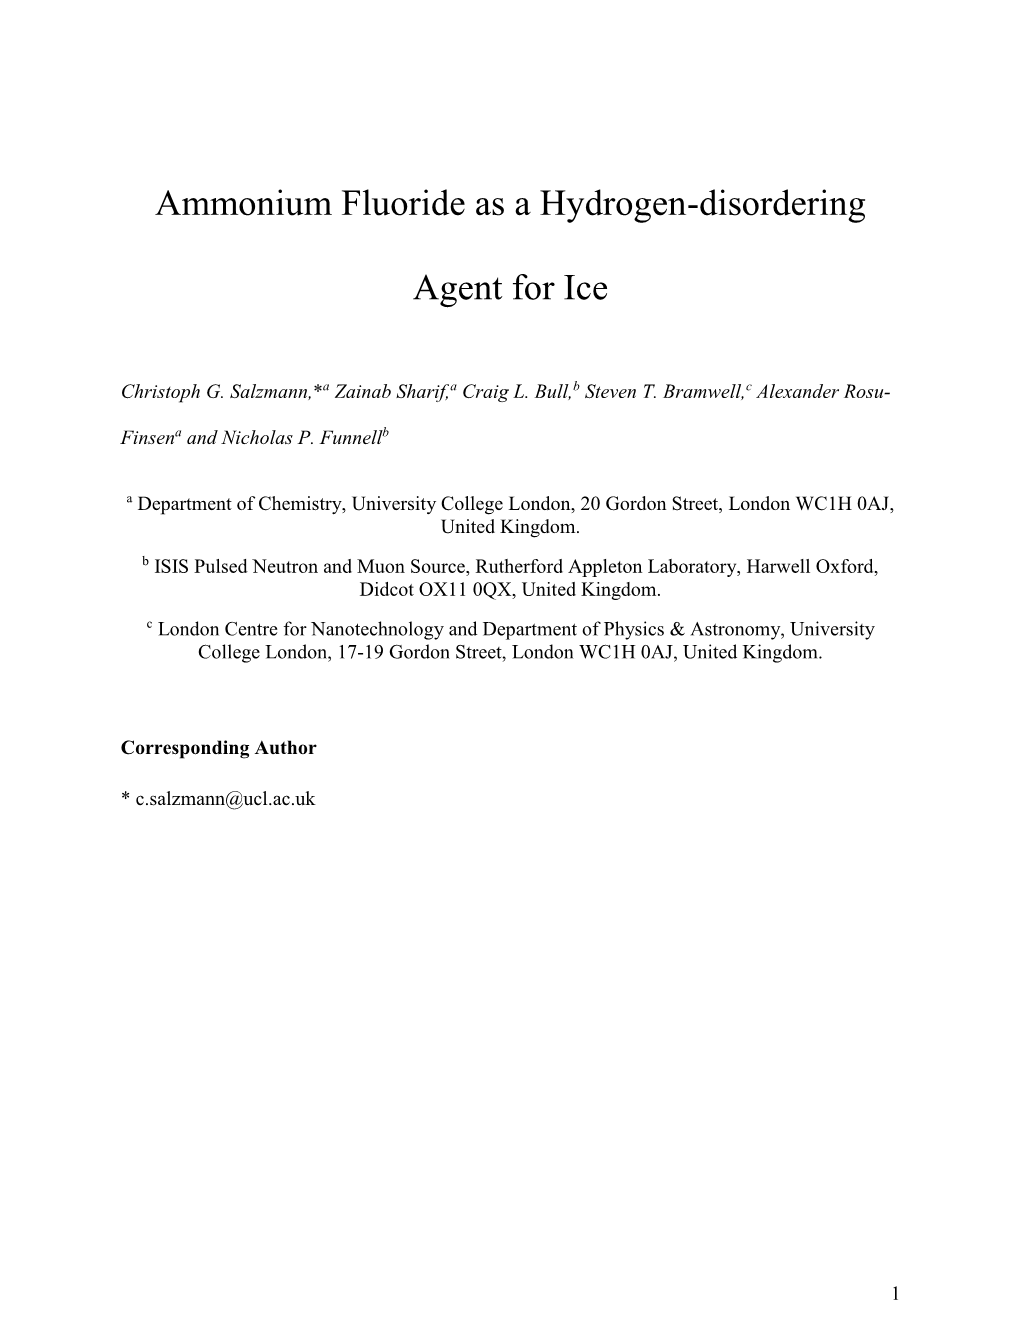 Ammonium Fluoride As a Hydrogen-Disordering Agent For